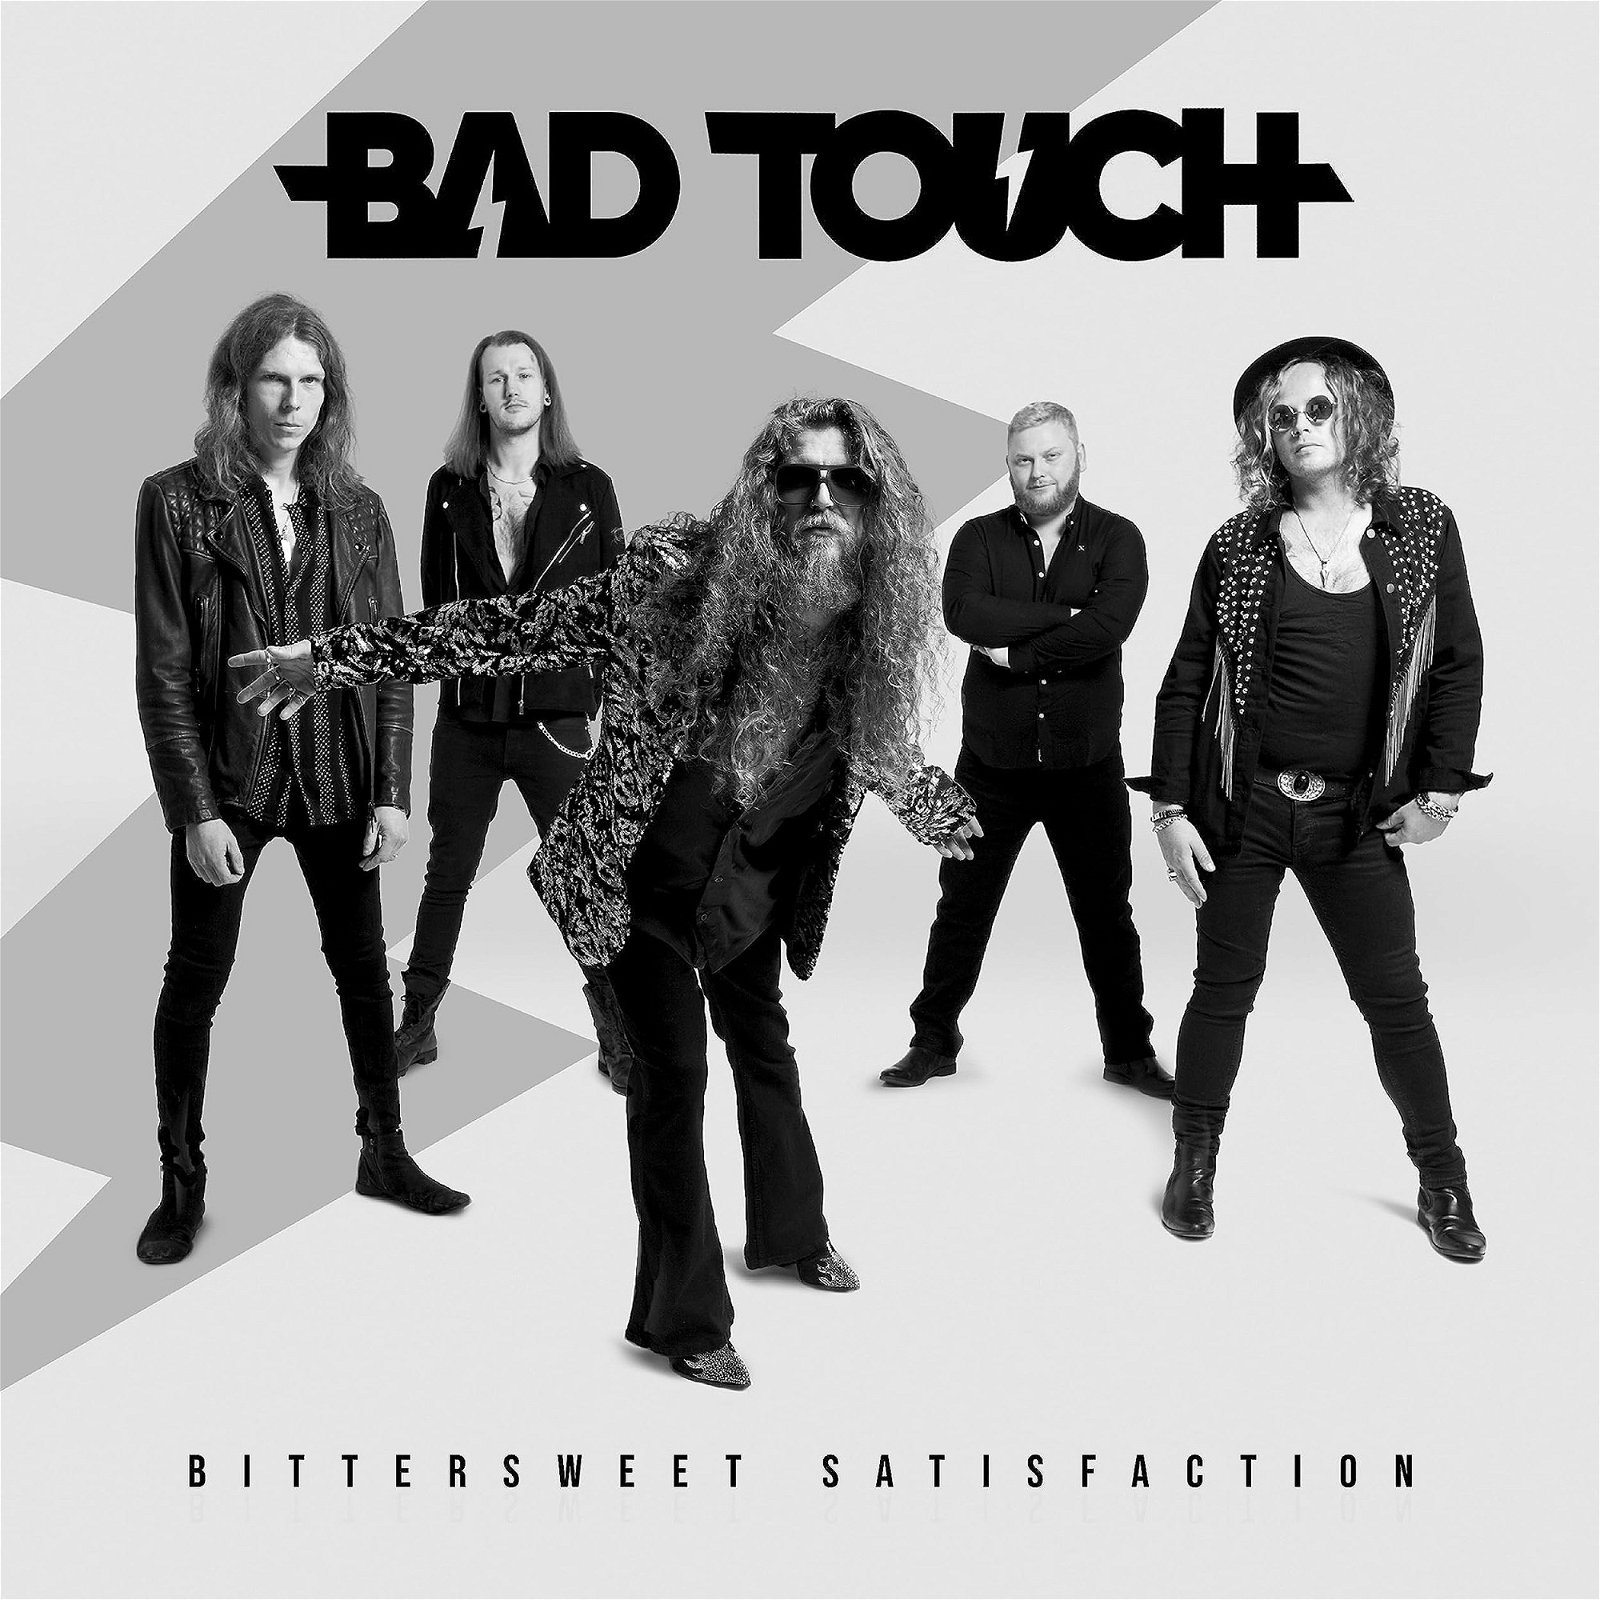 CD Shop - BAD TOUCH BITTERSWEET SATISFACTION